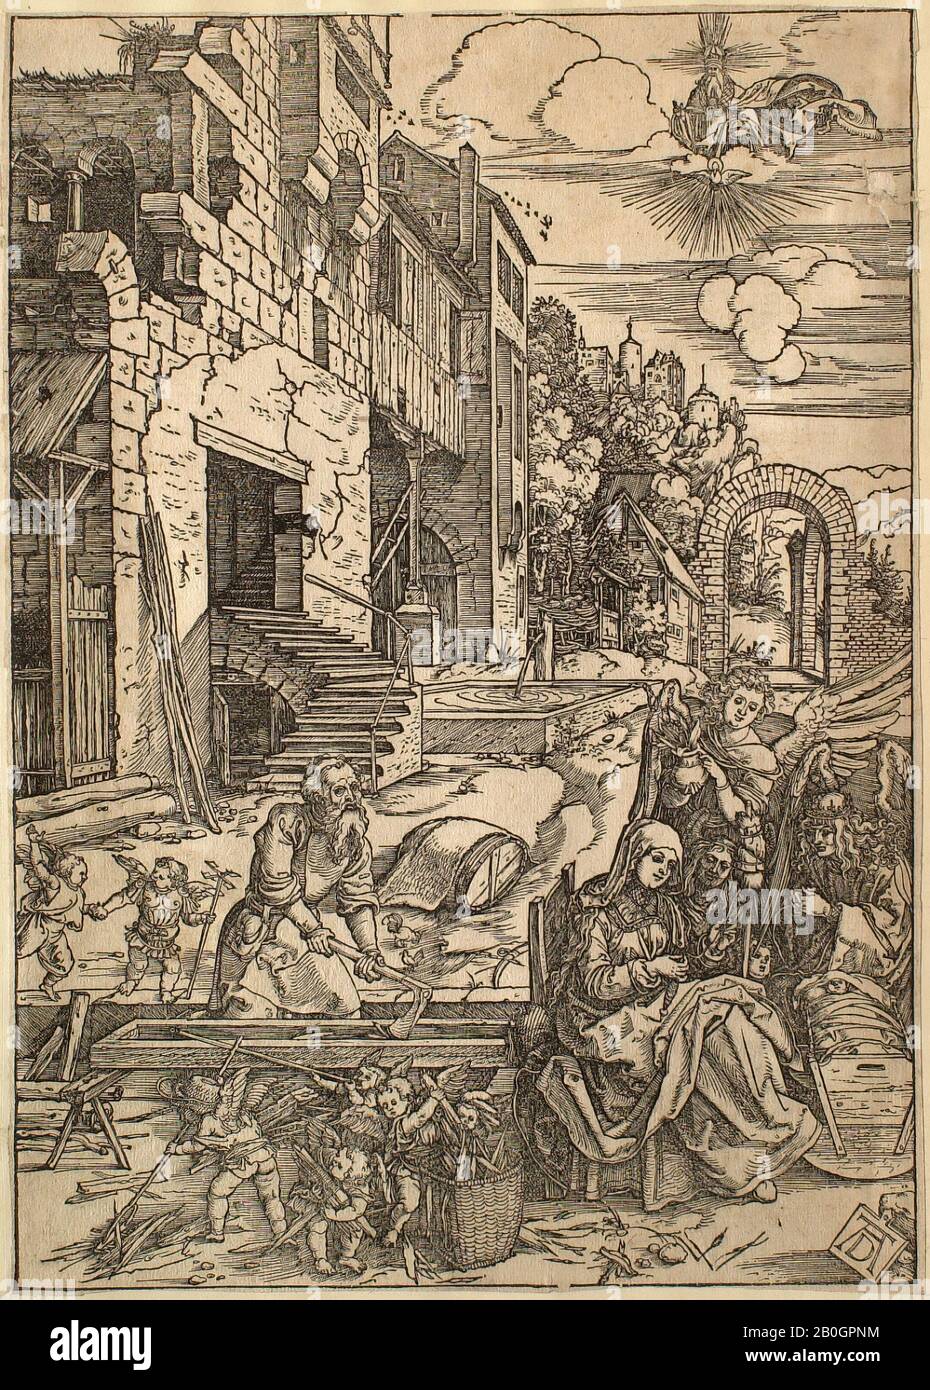 Albrecht Dürer, German, 1471–1528, The Life of the Virgin: The Sojourn of the Holy Family in Egypt, 1501–1502, Woodcut on paper, image: 11 9/16 x 8 3/16 in. (29.4 x 20.8 cm Stock Photo